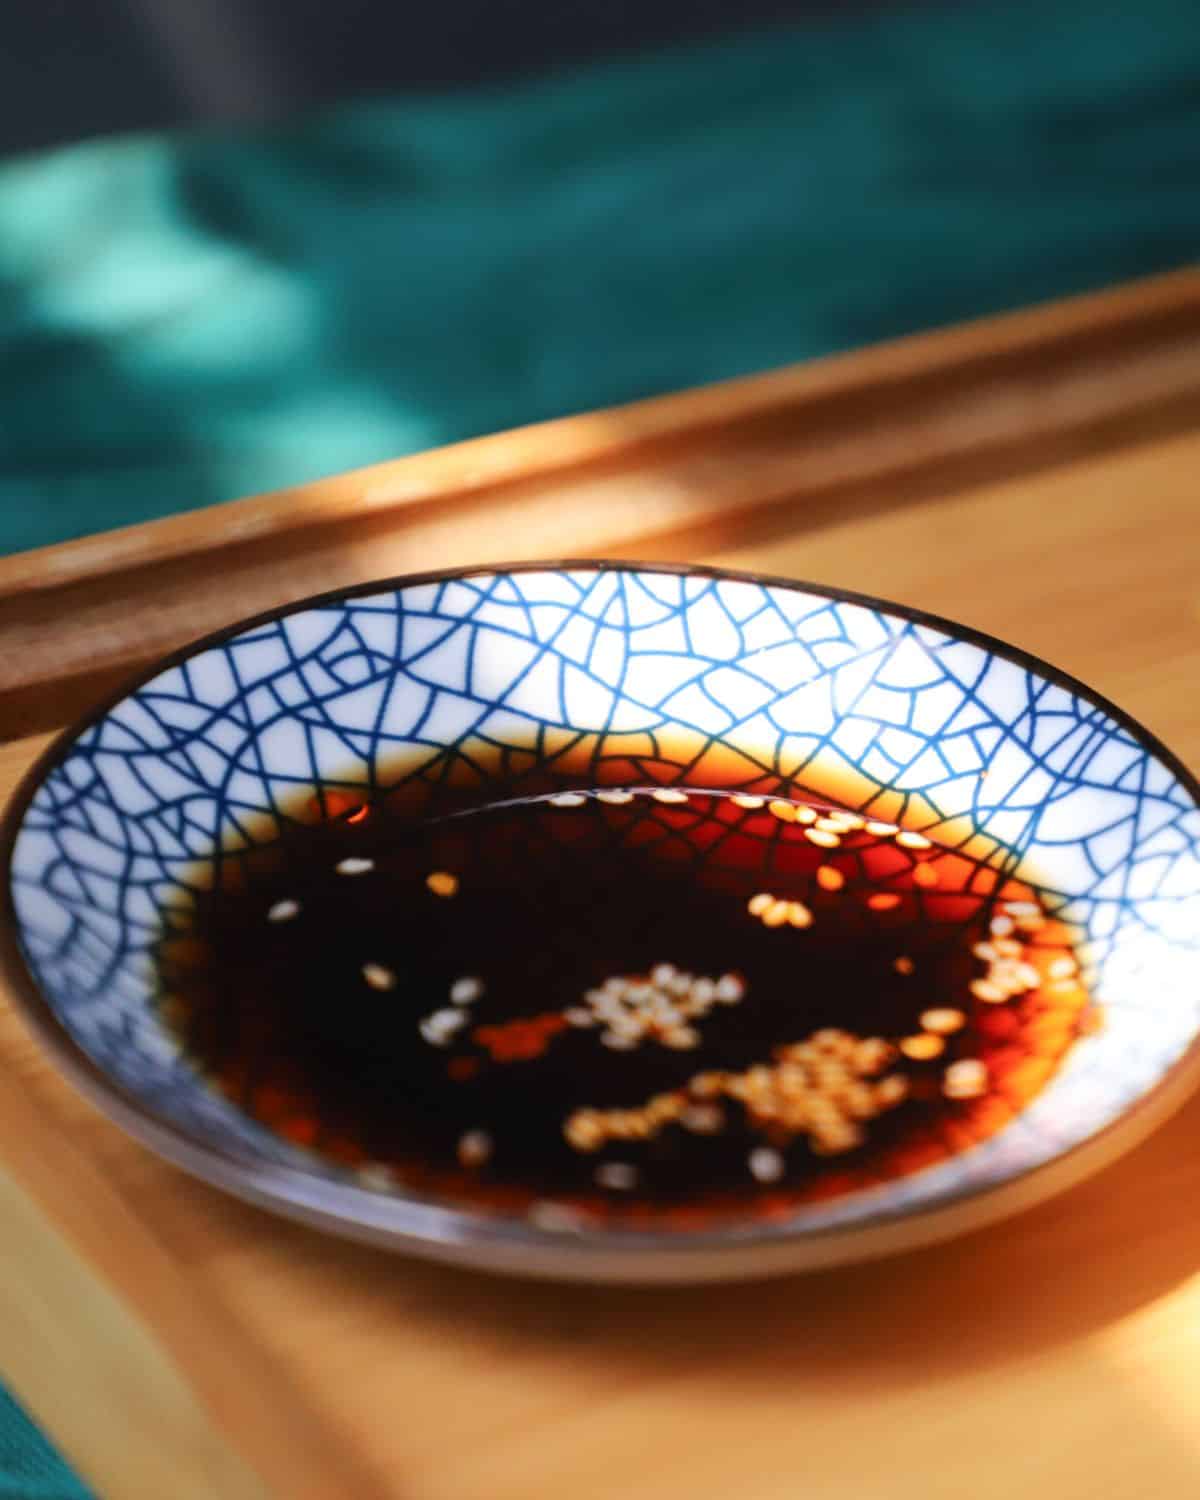 Soy sauce in a bowl with sesame seeds.